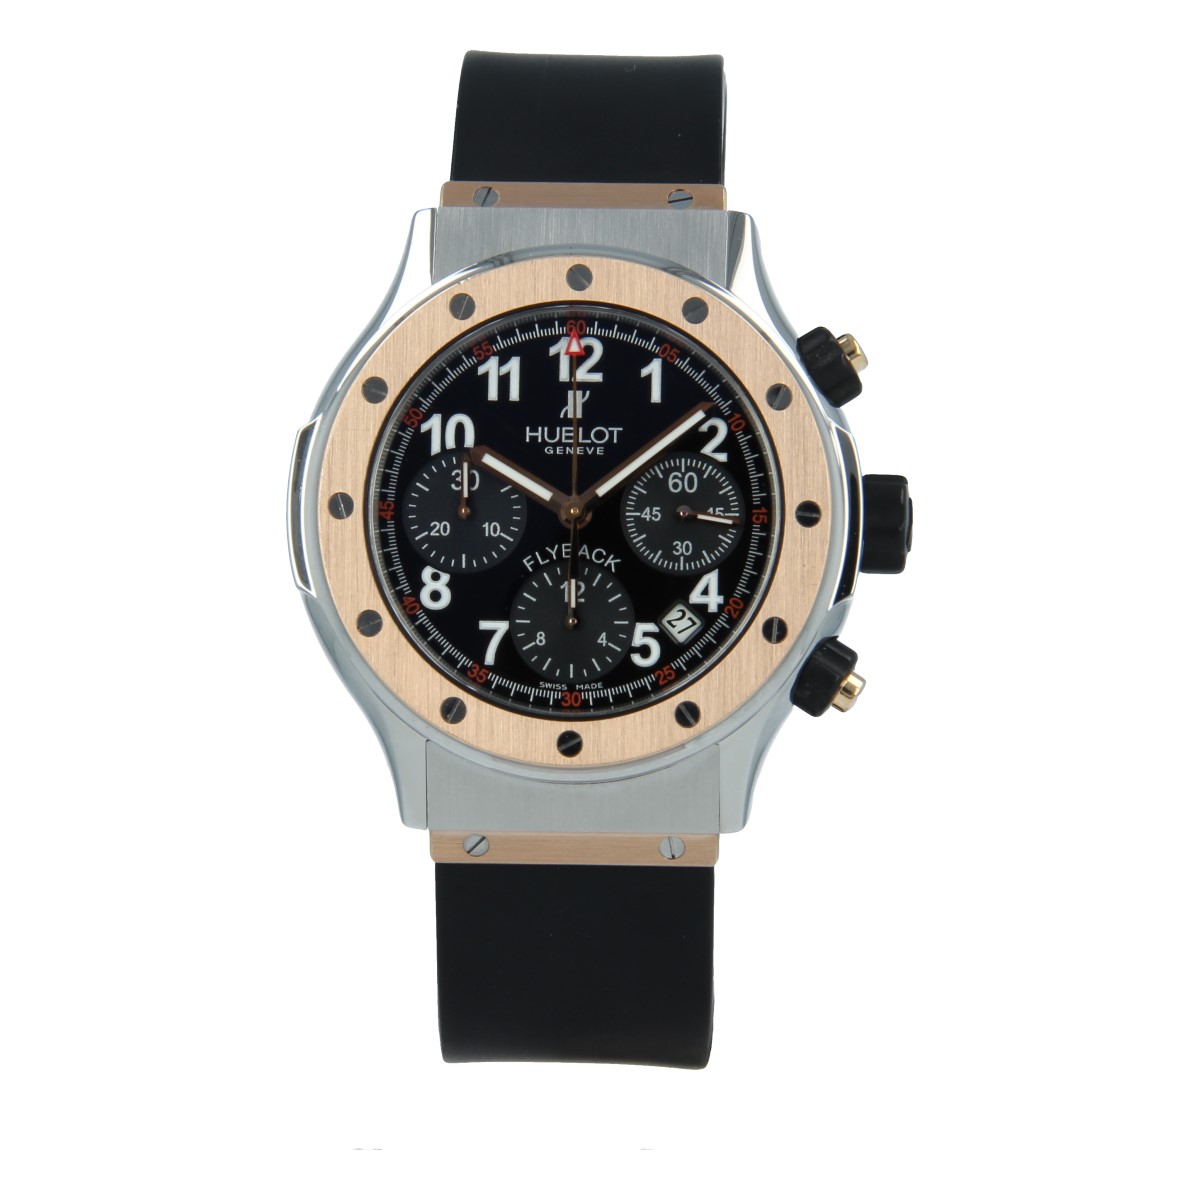 Hublot Super B Flyback Chronograph Steel and Rose Gold | Buy pre-owned Hublot watch